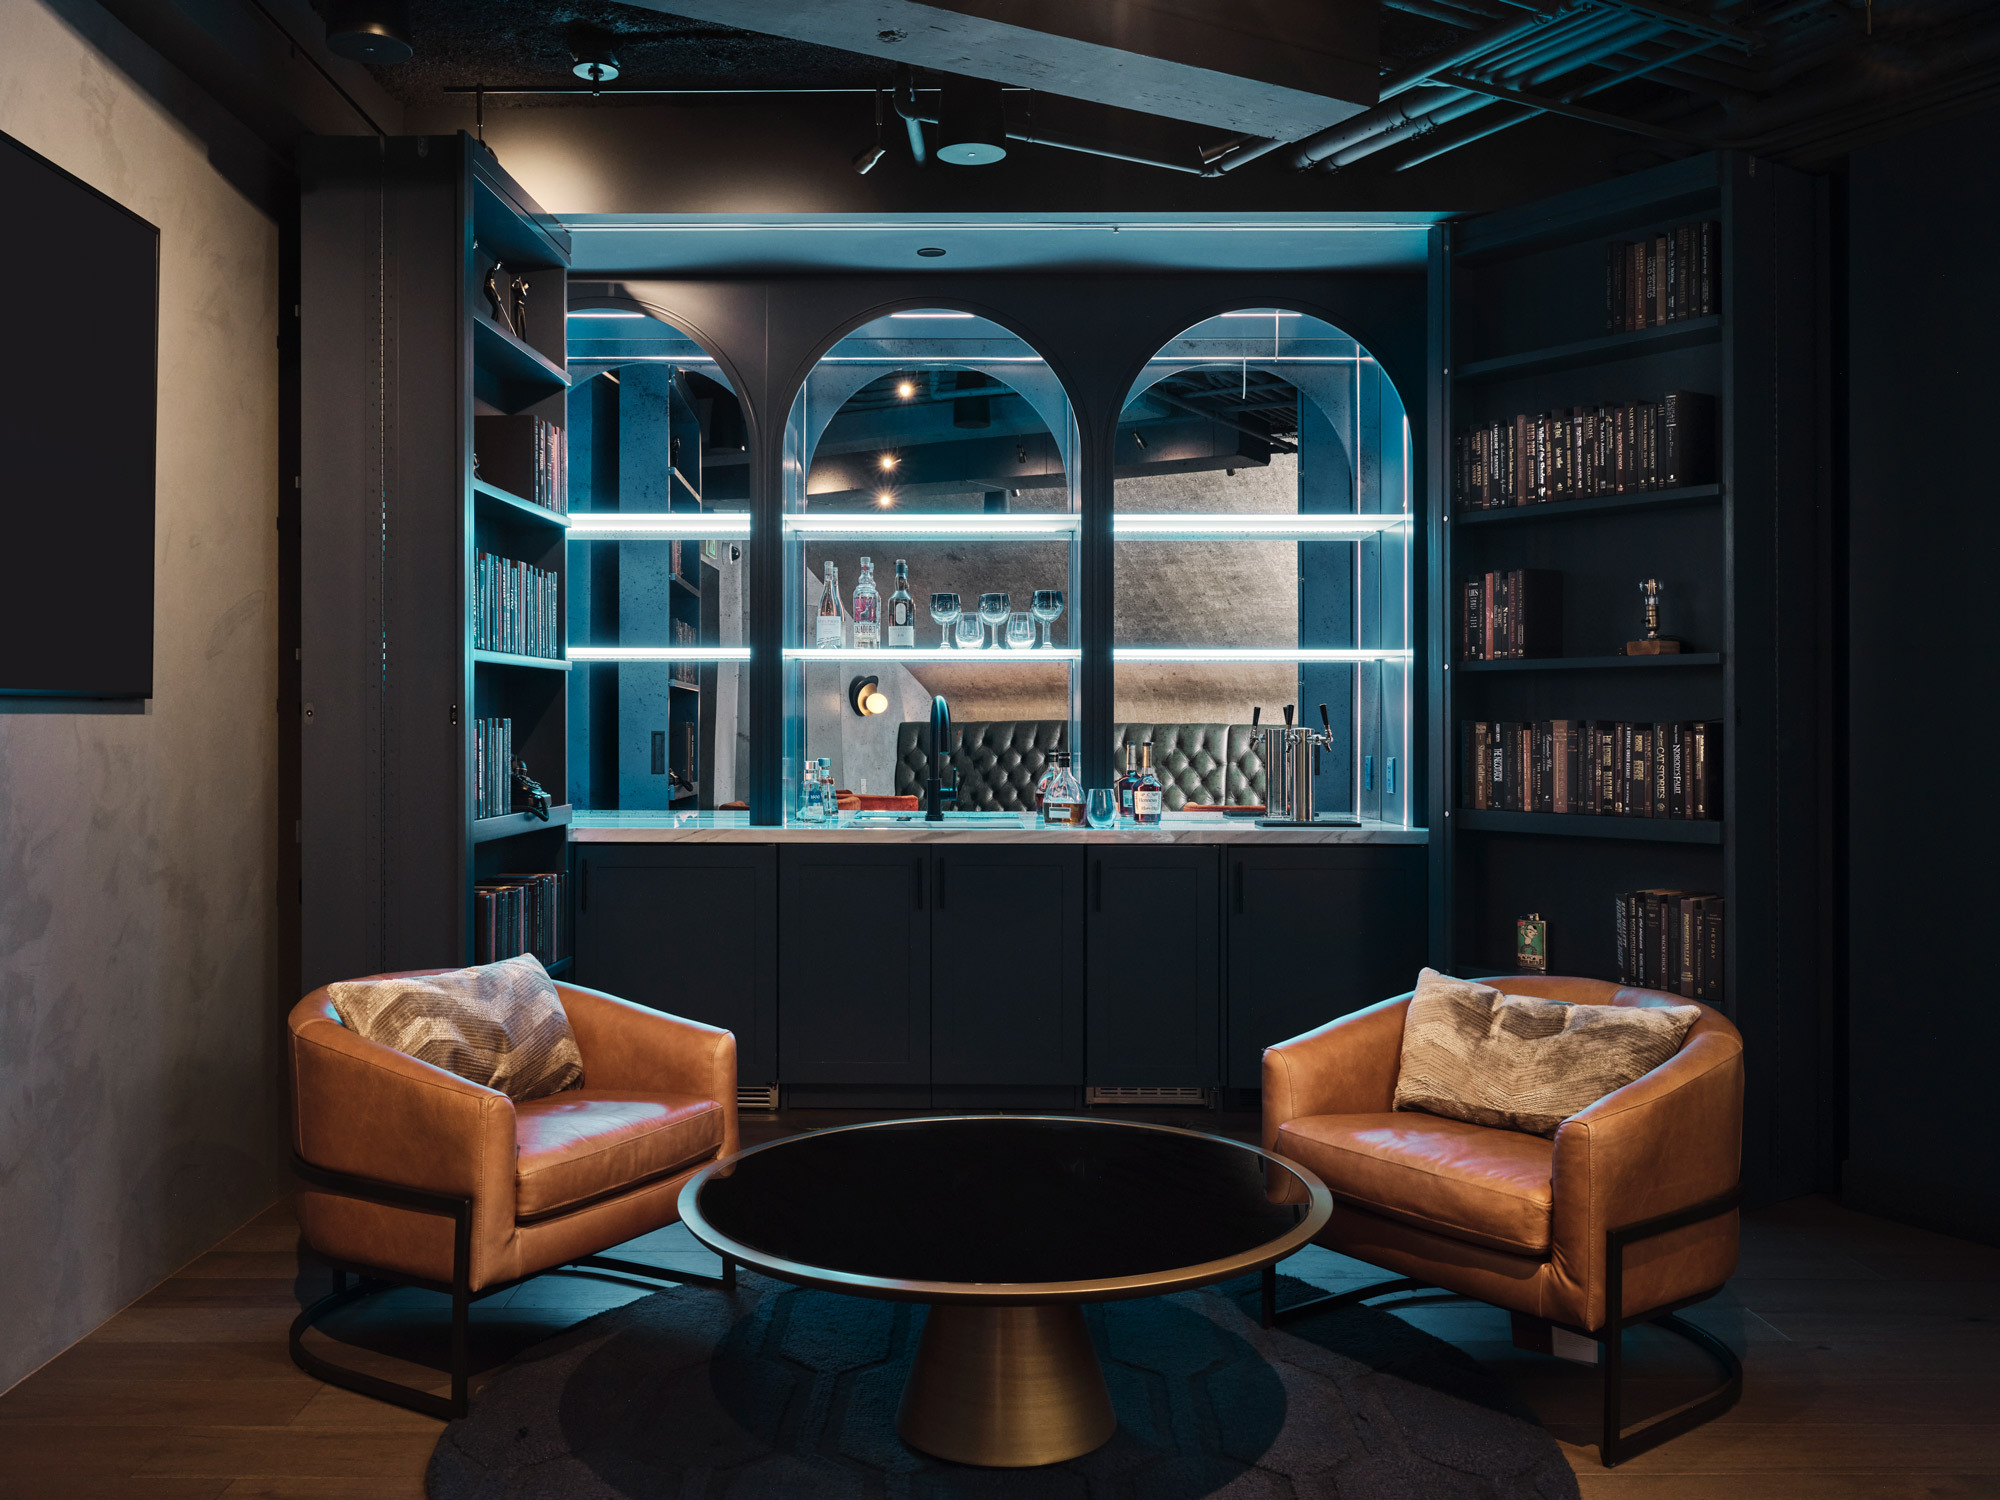 Modern lounge with two caramel leather armchairs flanking a circular black coffee table, set against a backdrop of deep blue bookshelves with integrated lighting, showcasing a curated collection of books and decorative objects. The shelves feature elegant arch-top compartments, enhancing the sophisticated, intimate ambiance.